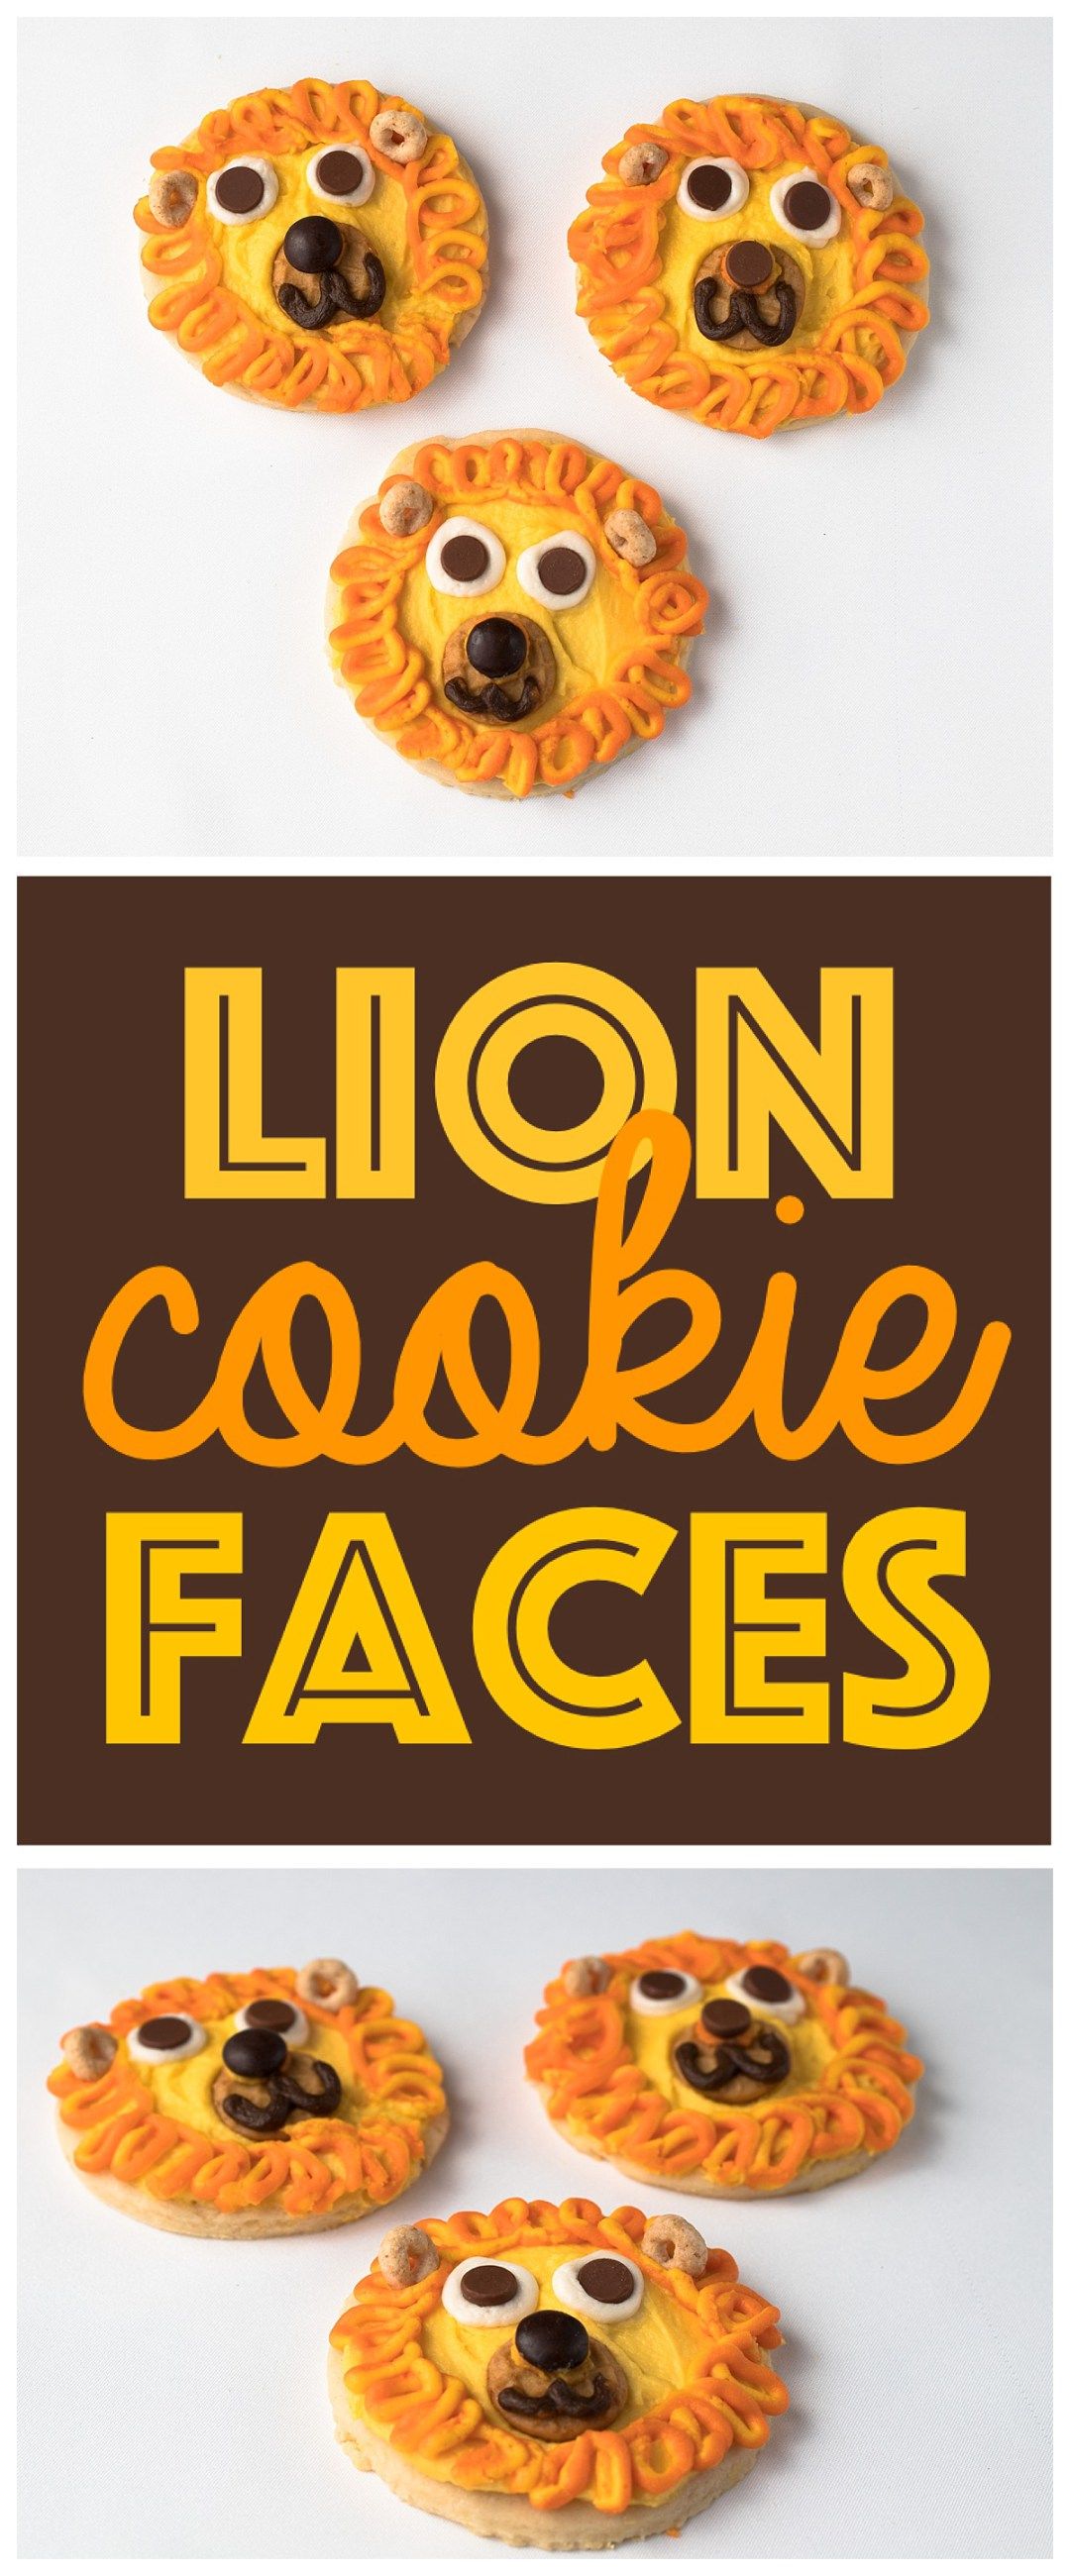 Lion Face Cookies - Easy Animal Face Kid Food Snack Idea | Cookies ...